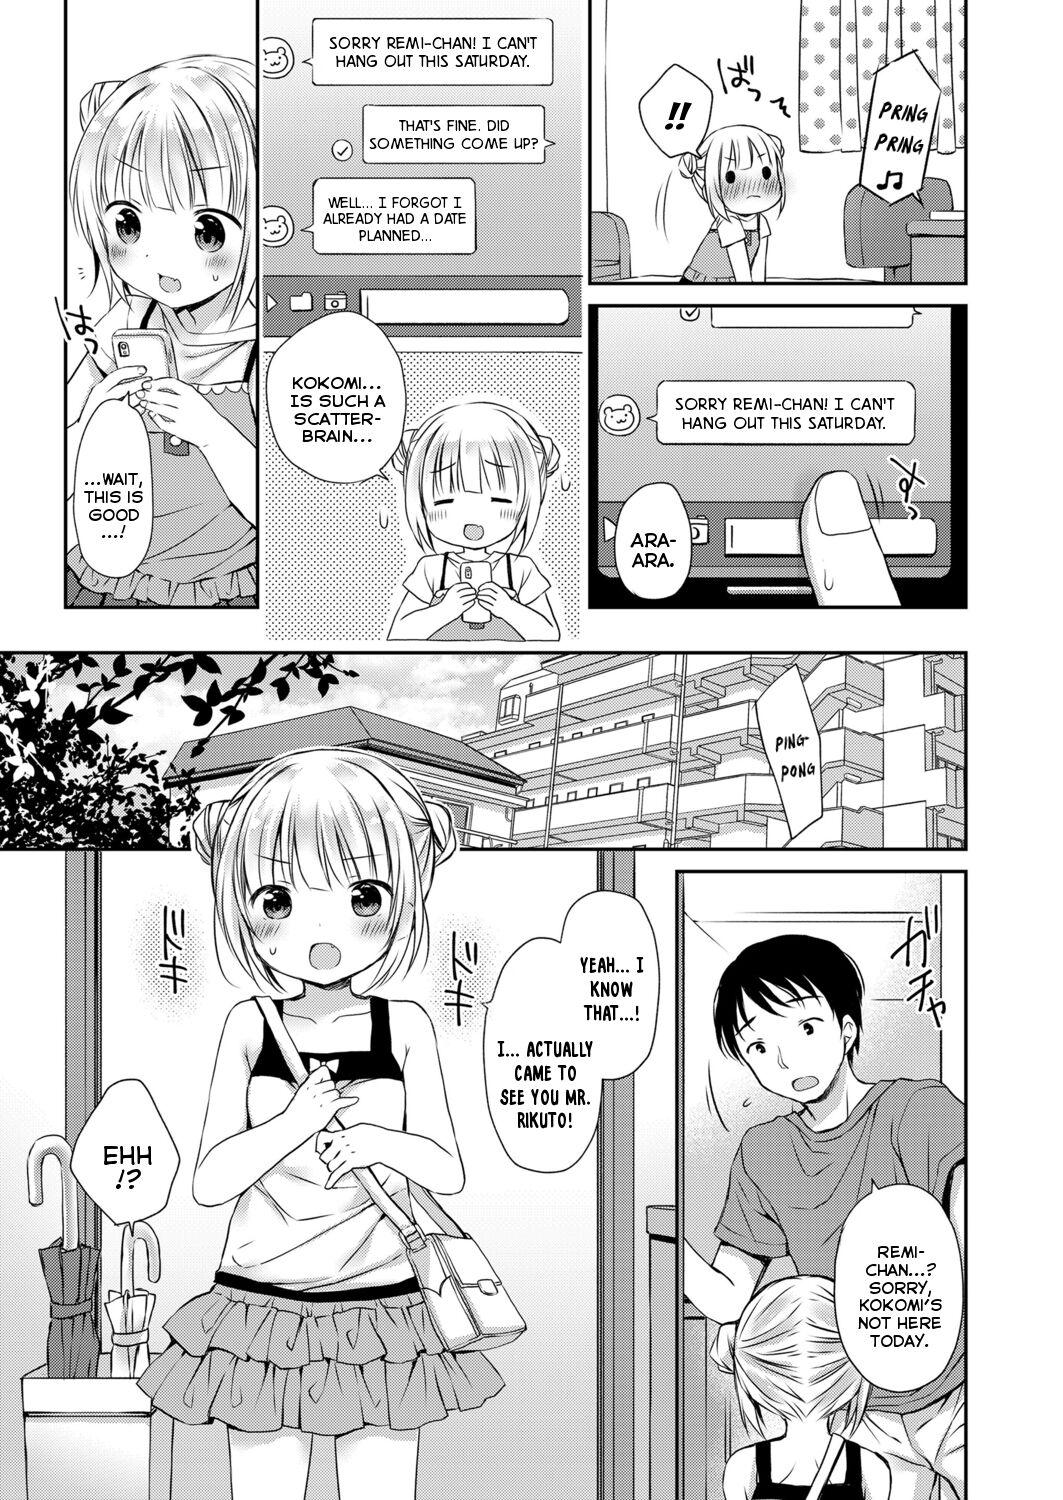 Hermosa Musume no Inu Ma ni Himitsu no Ouse | My Secret Love-Life When My Daughter is Away Massage - Page 9